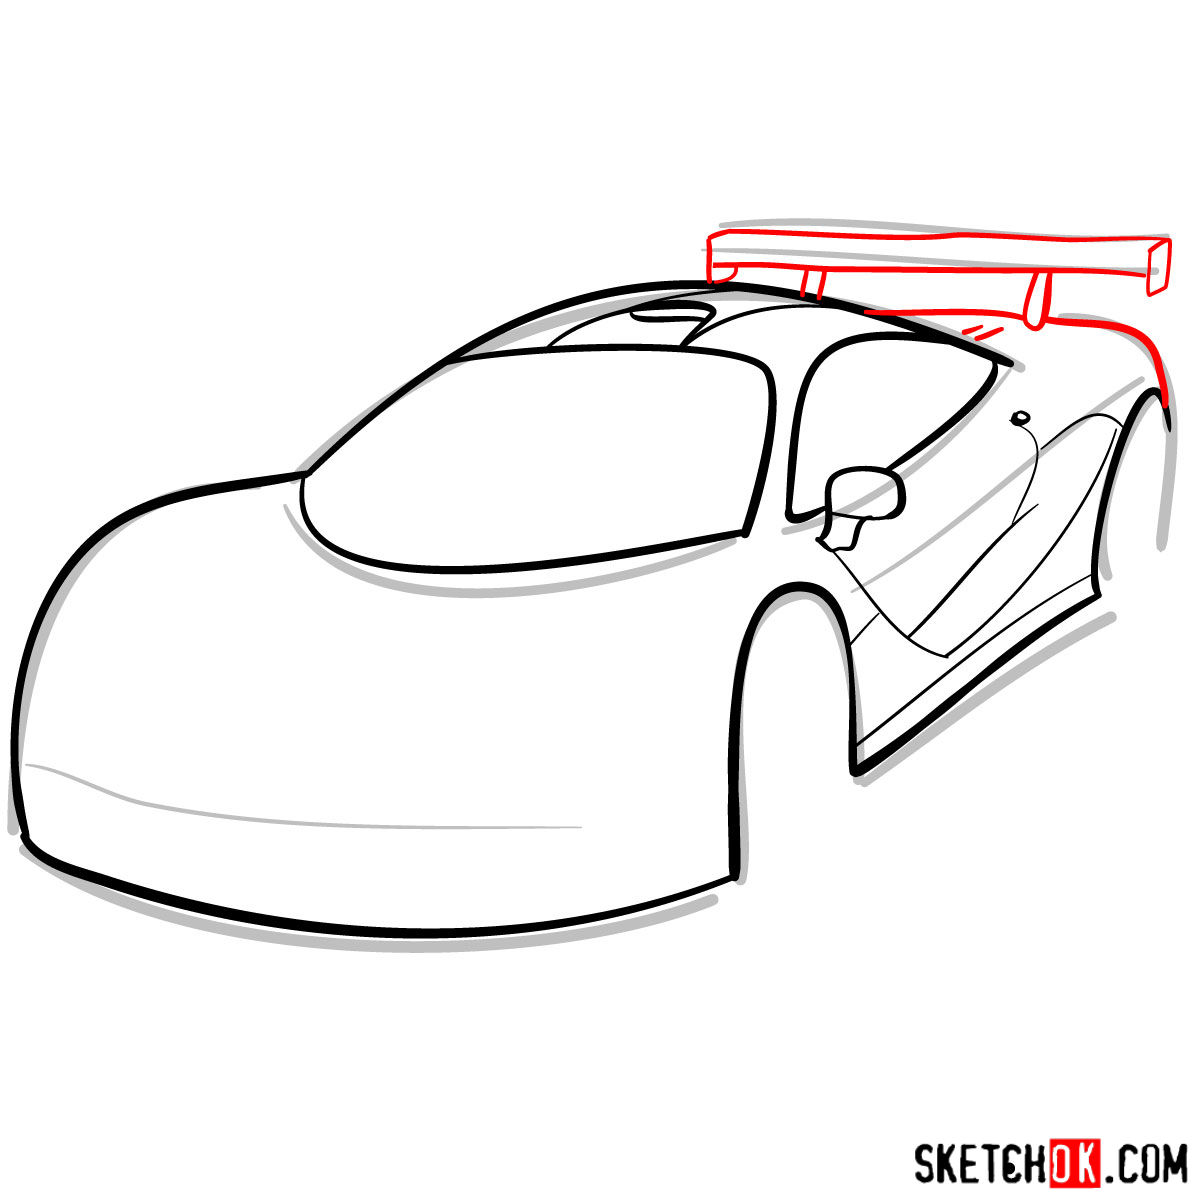 McLaren F1 - step by step drawing guide - step 07